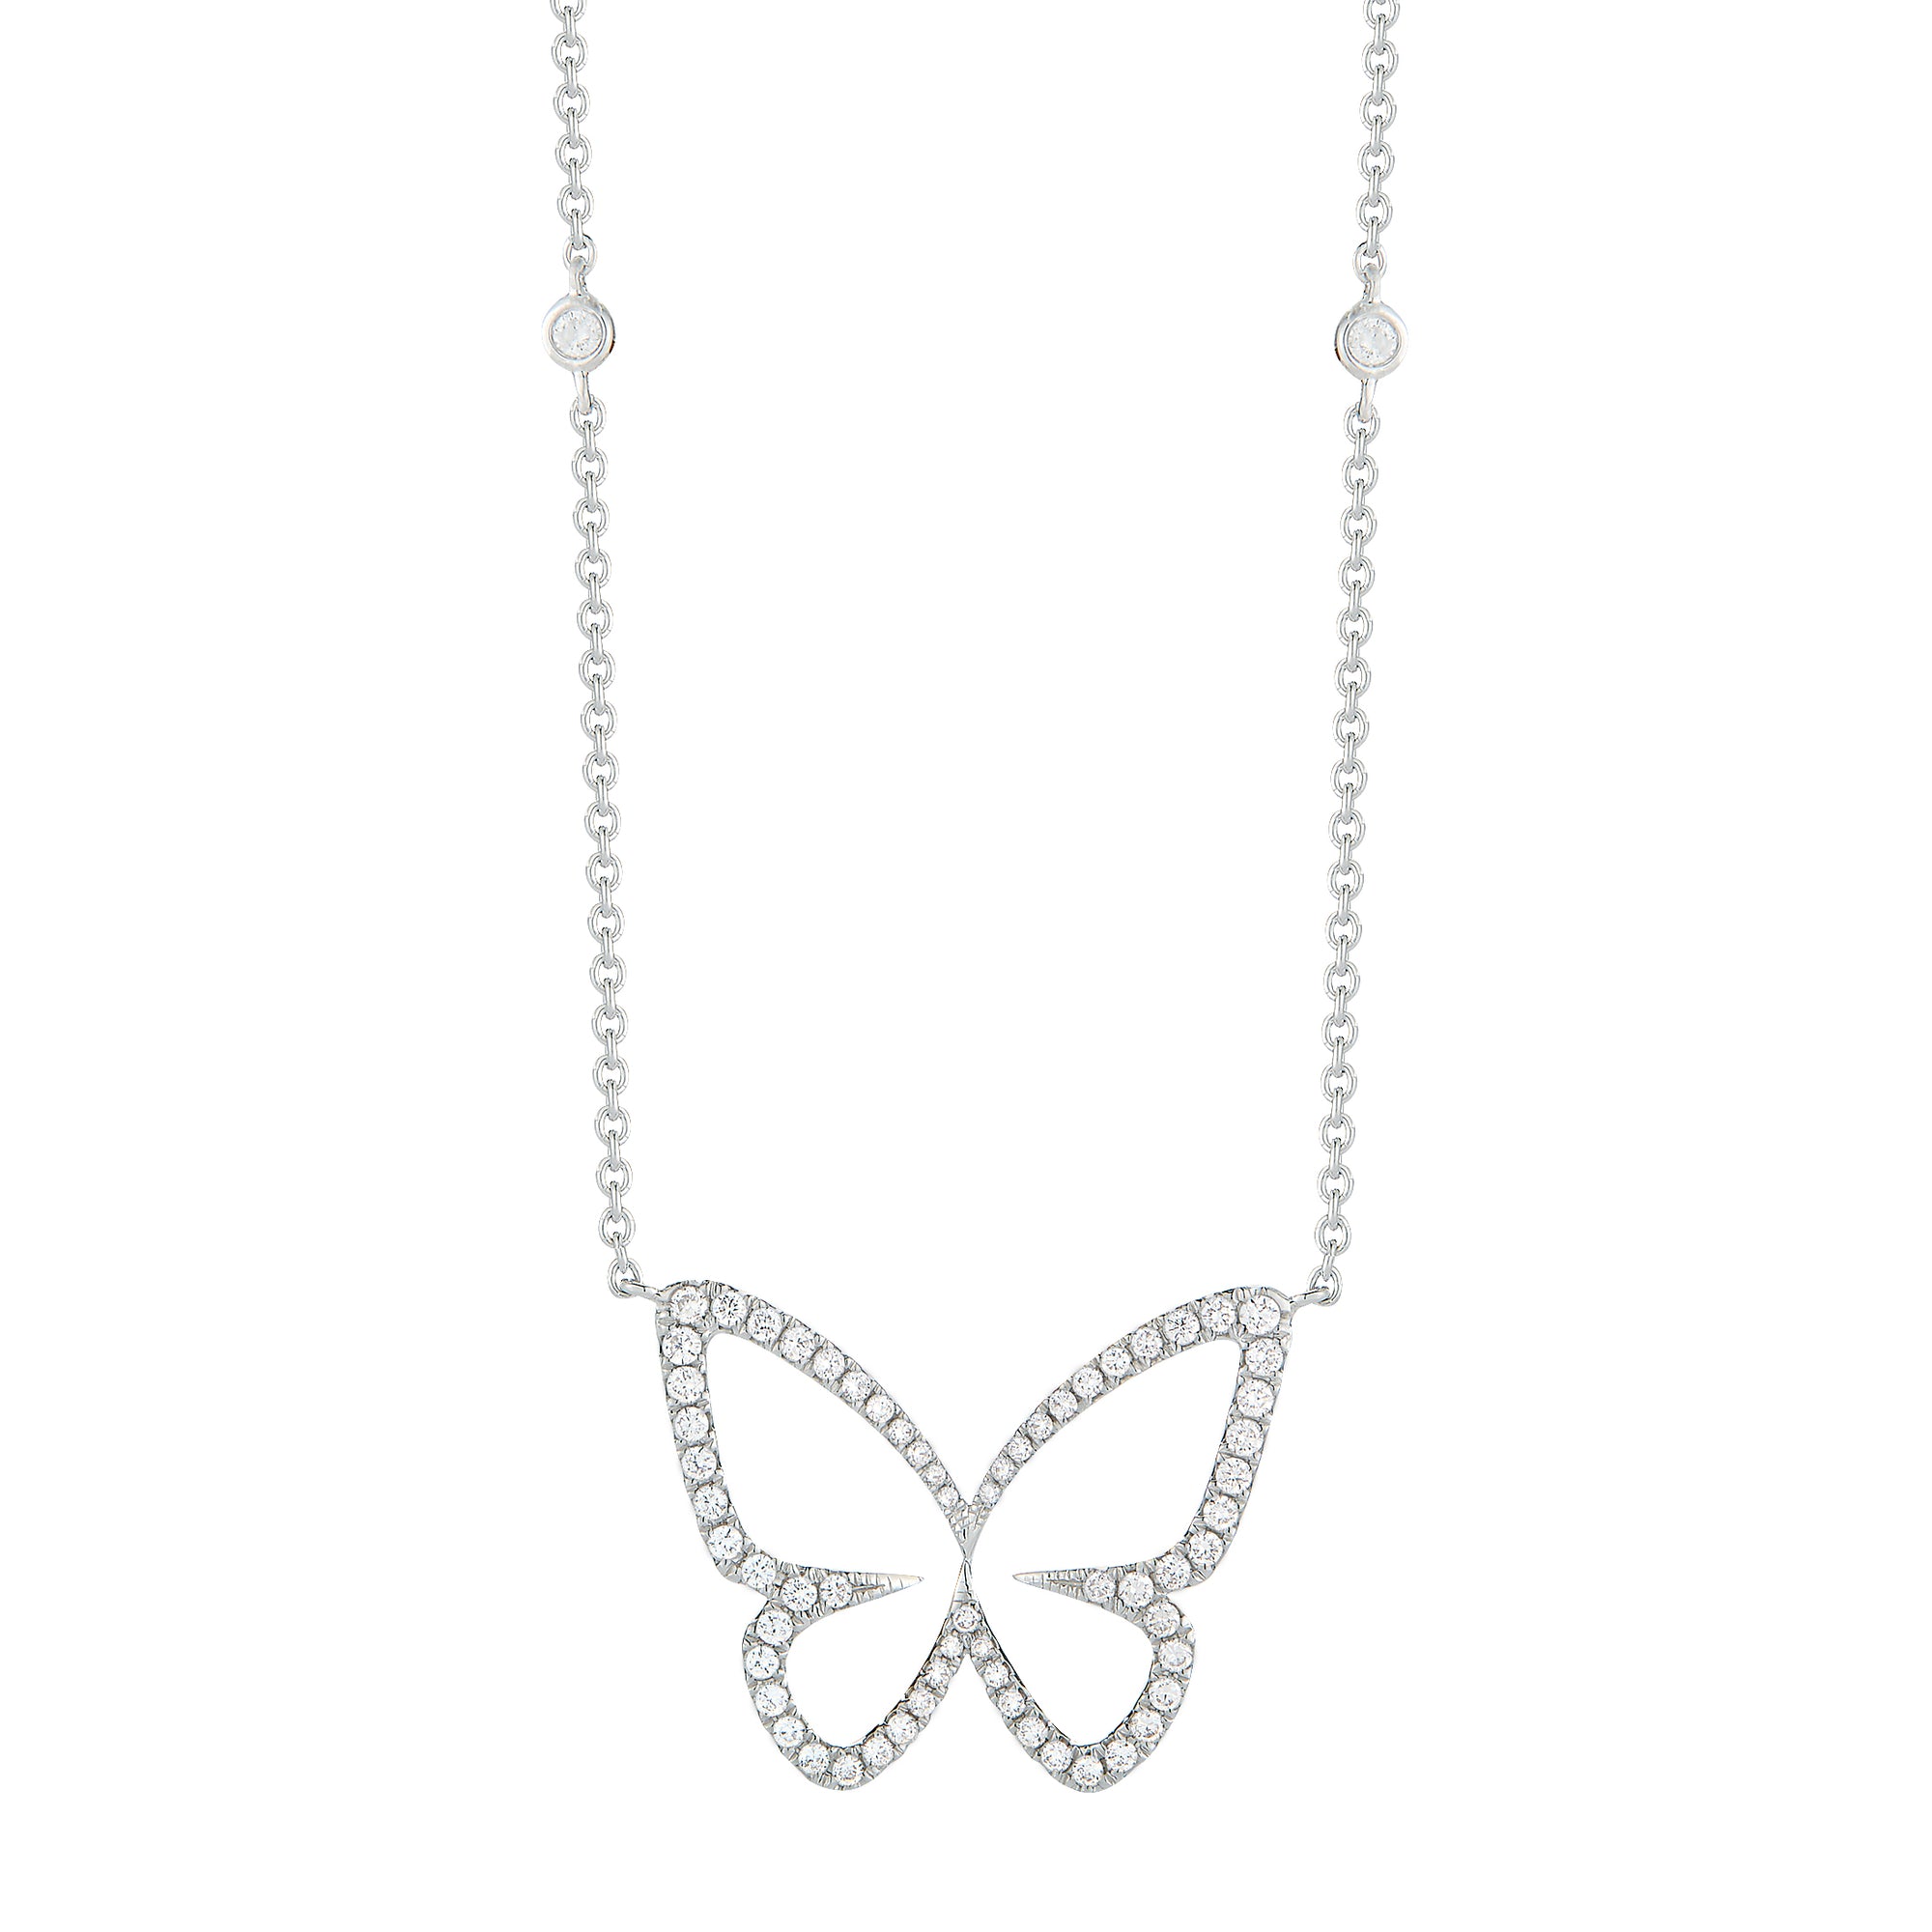 Diamond Butterfly Cutout Pendant Necklace -18K white gold weighing 4.34 grams -67 round diamonds totaling 0.49 carats.